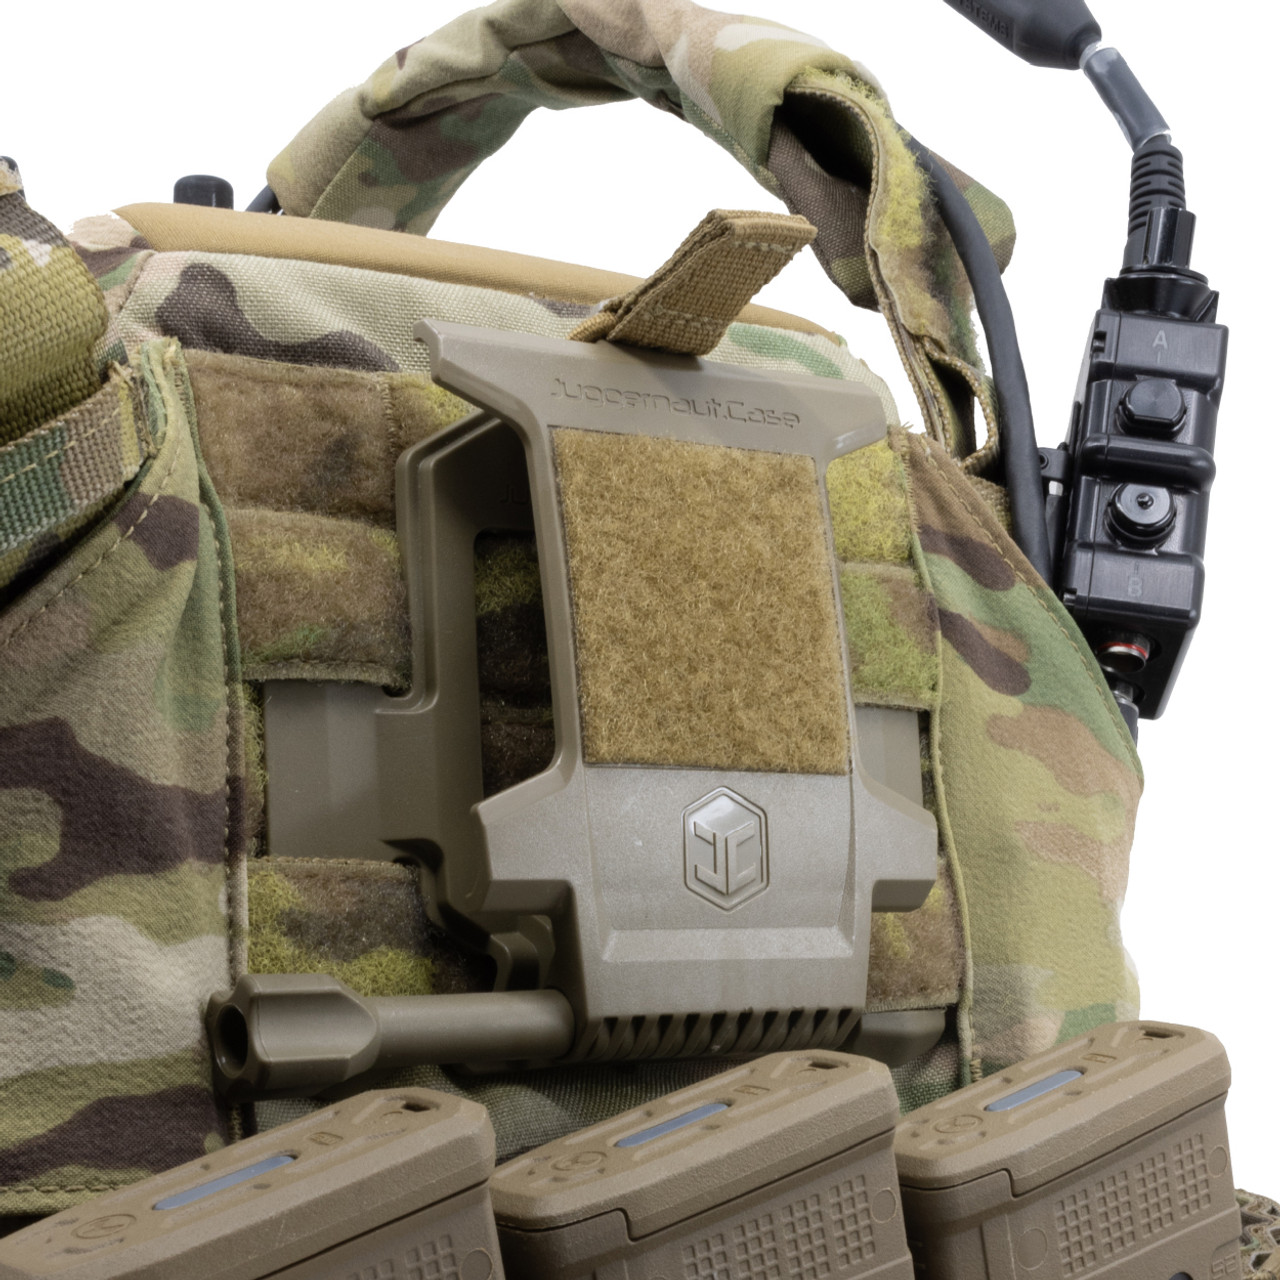 Carrie is a wearable pocket for police and soldiers to store